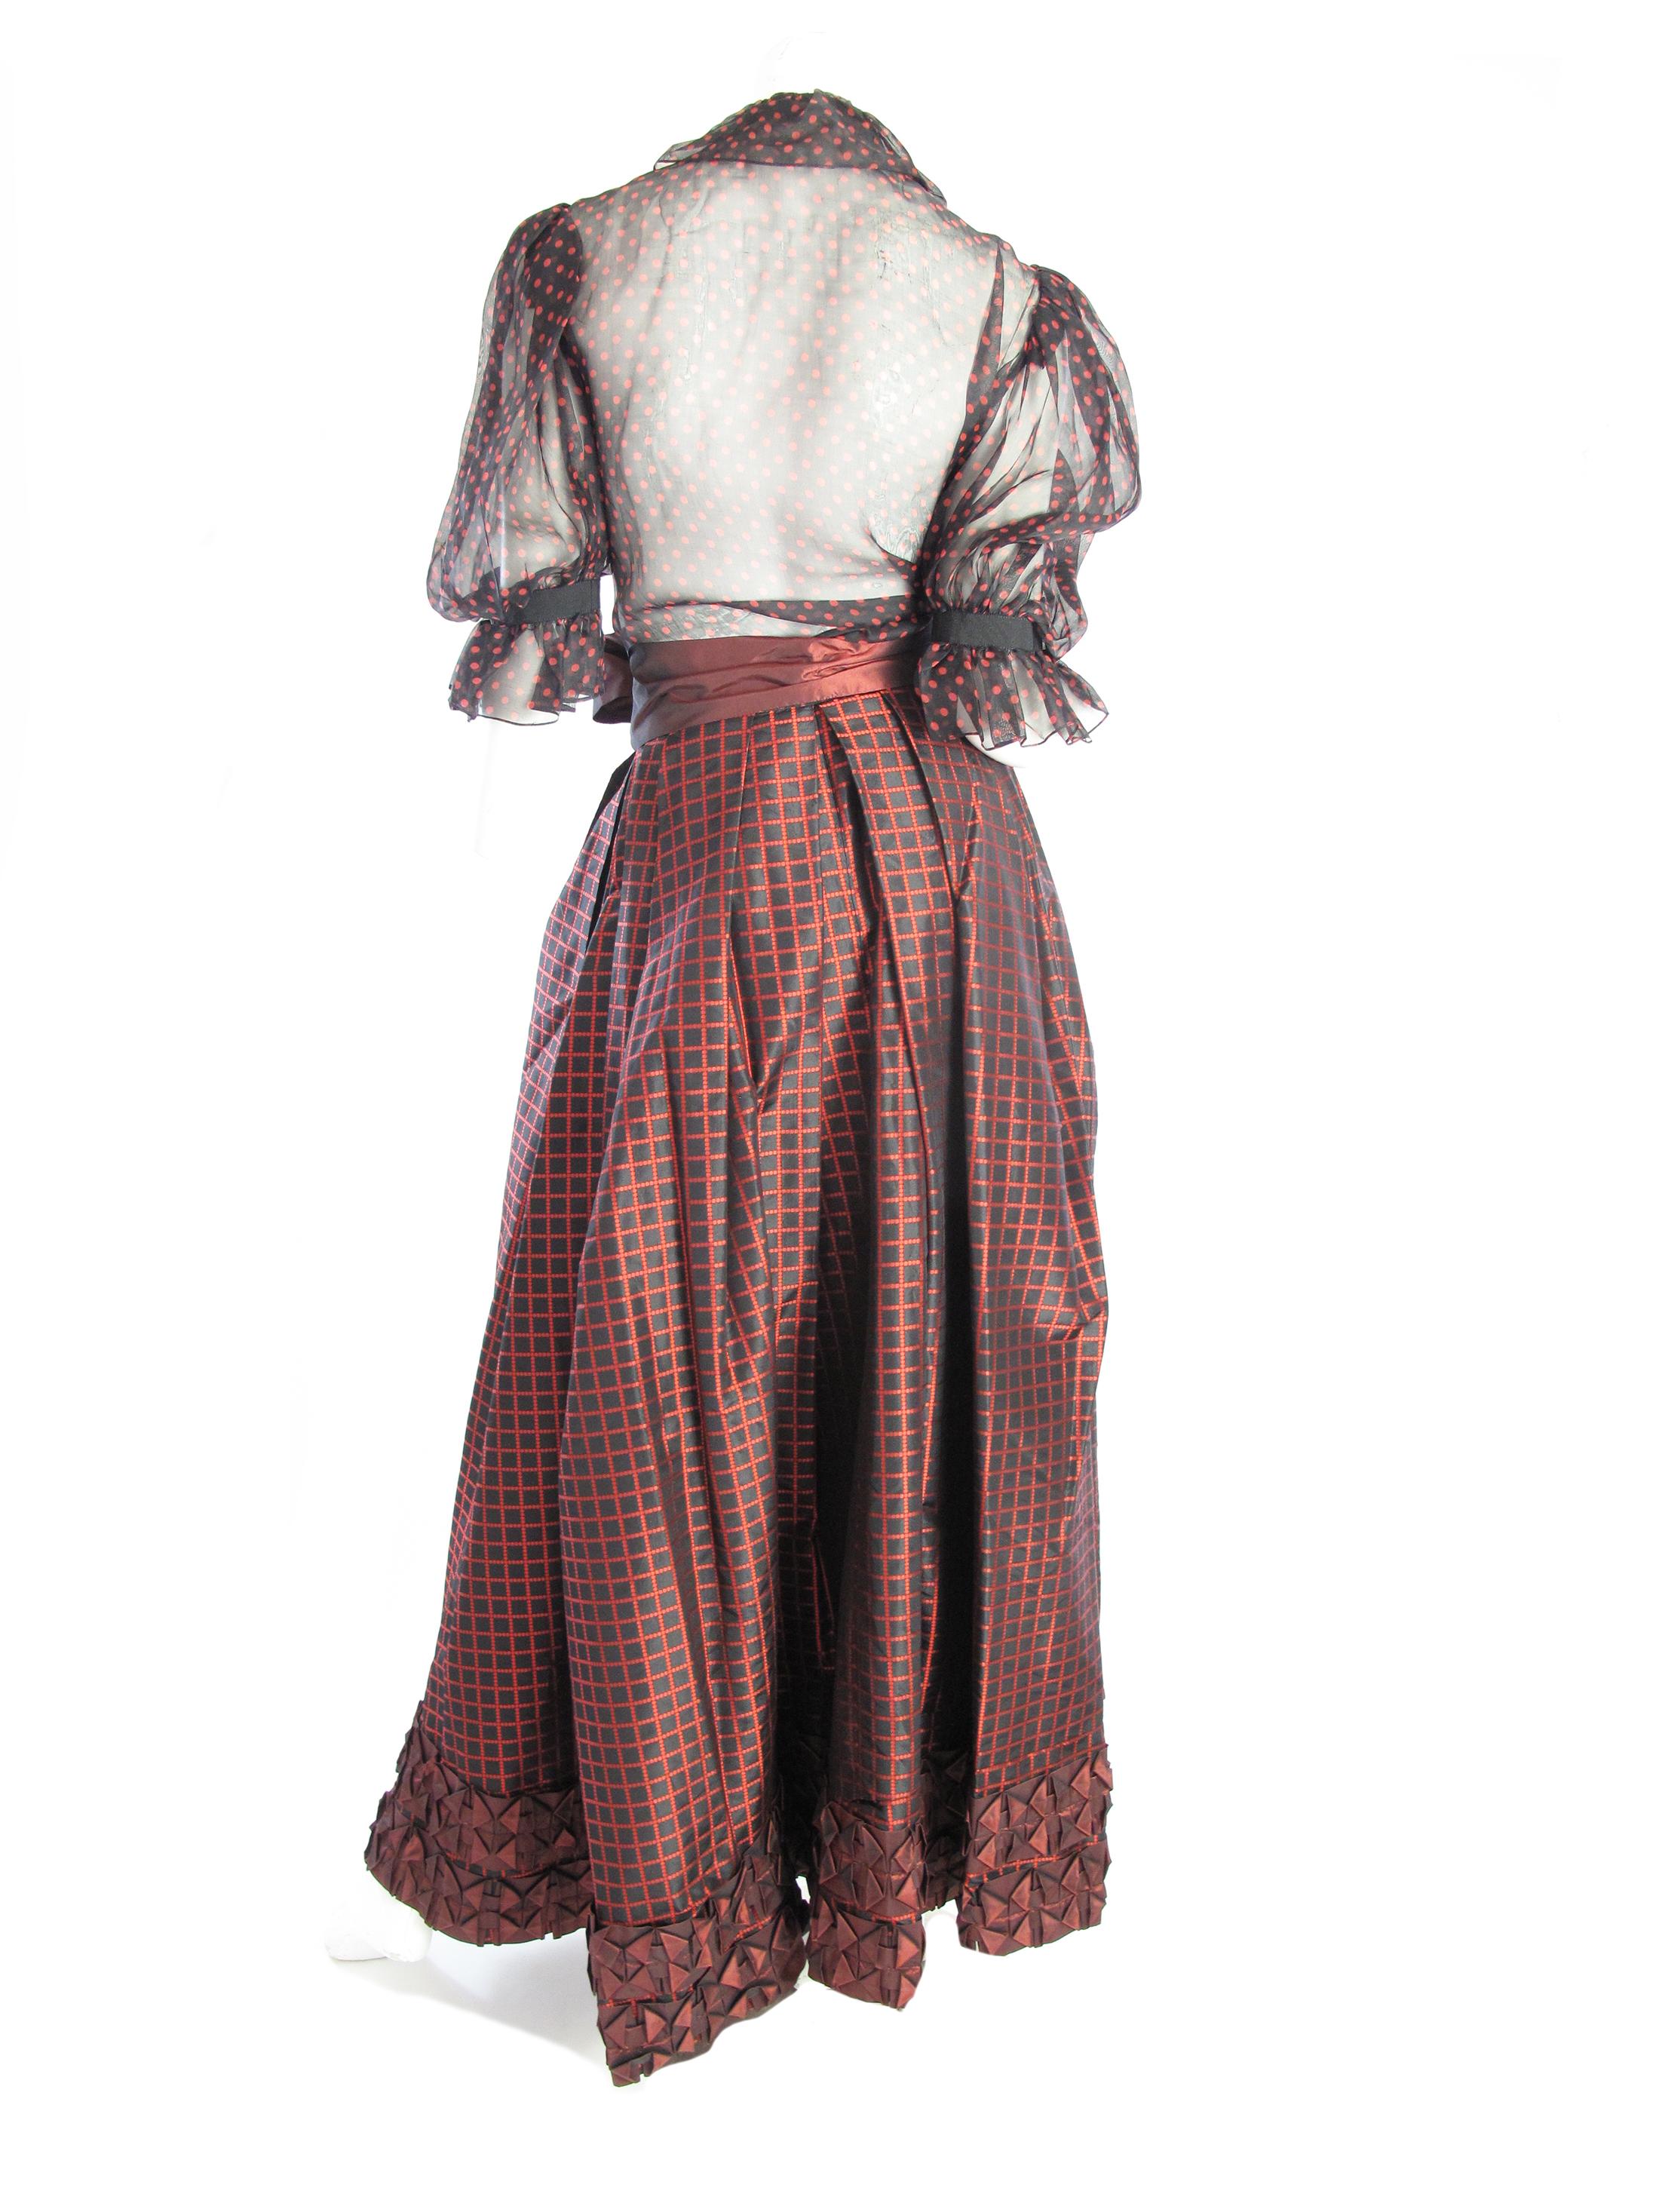 1980s Yves Saint Laurent Rive Gauche Taffeta Evening skirt and sheer bow blouse. 
Condition: Excellent. 
Size Small / 36

35